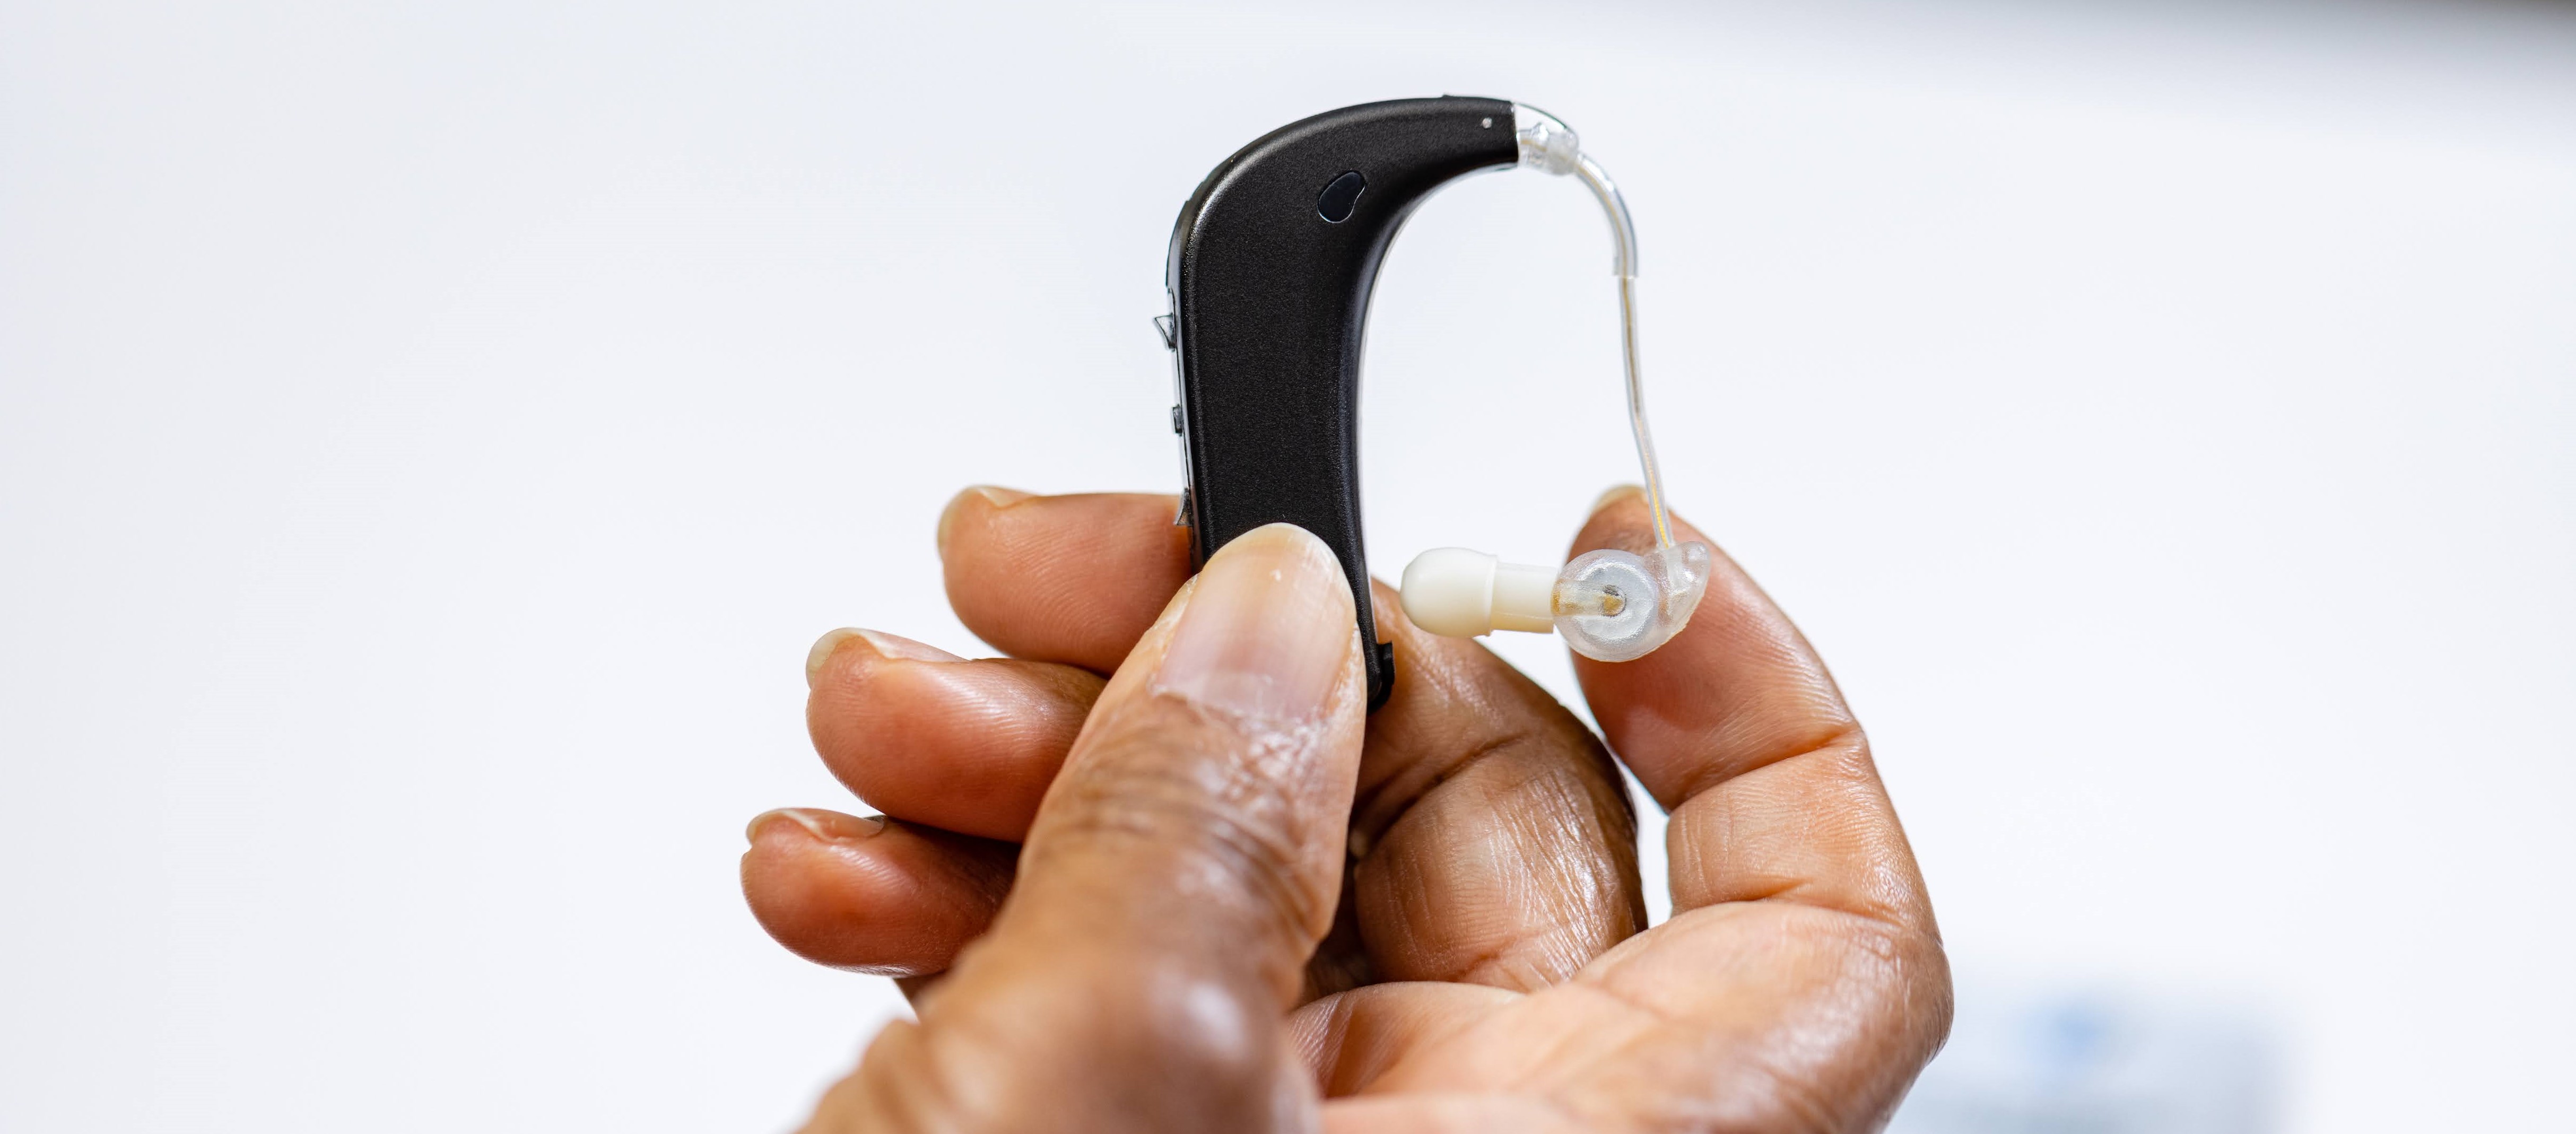 A hand holds an over-ear amplification device